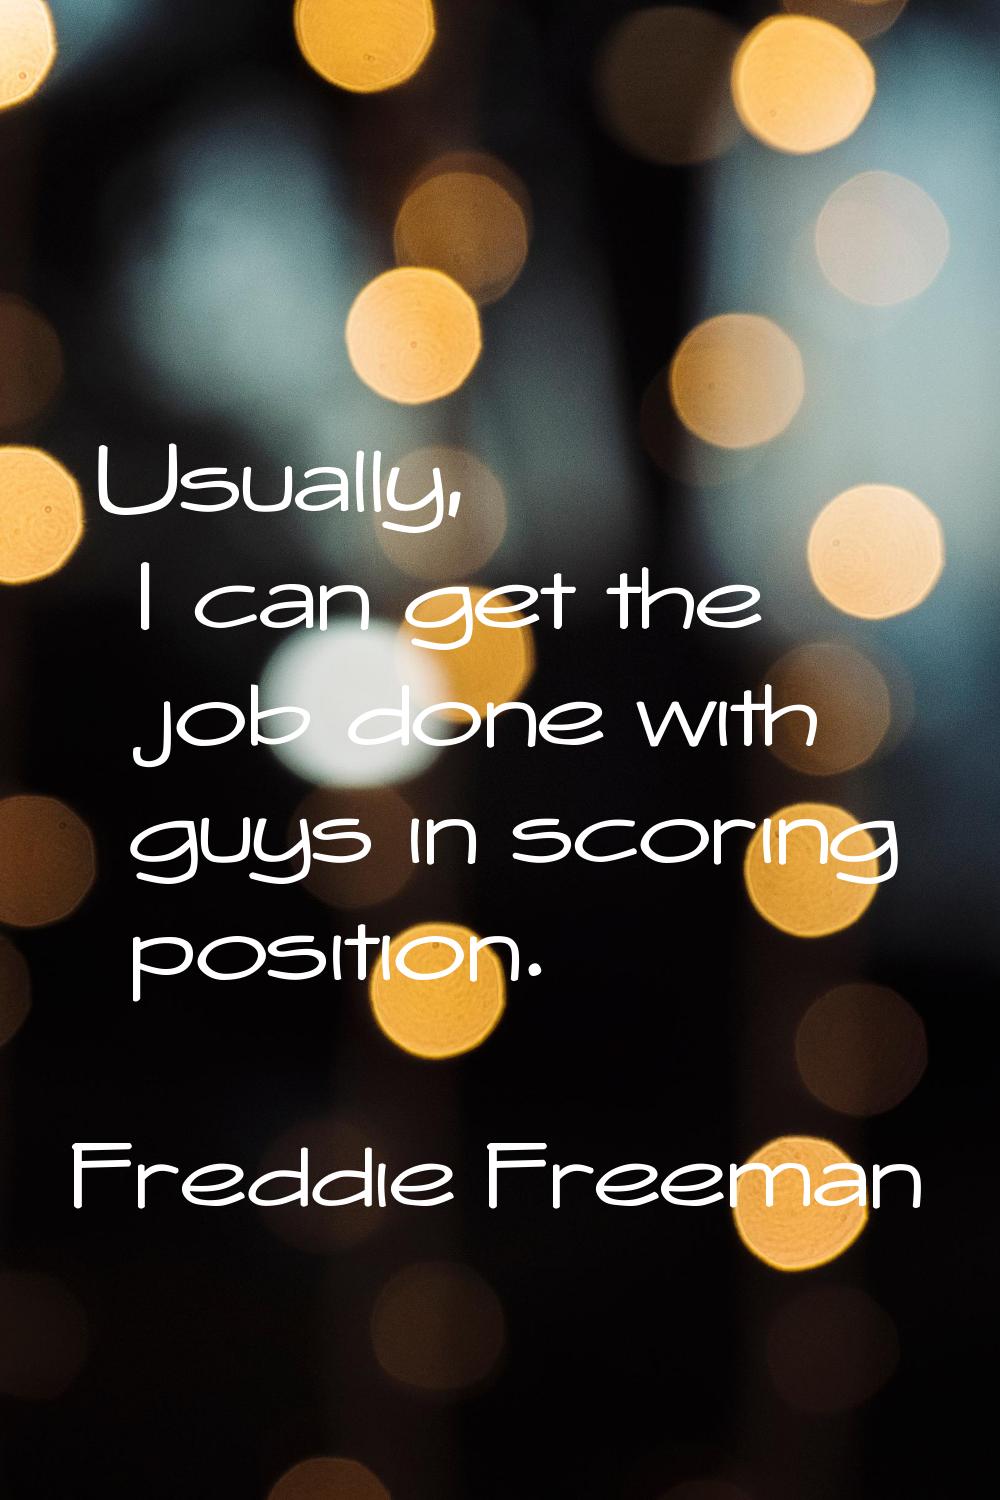 Usually, I can get the job done with guys in scoring position.